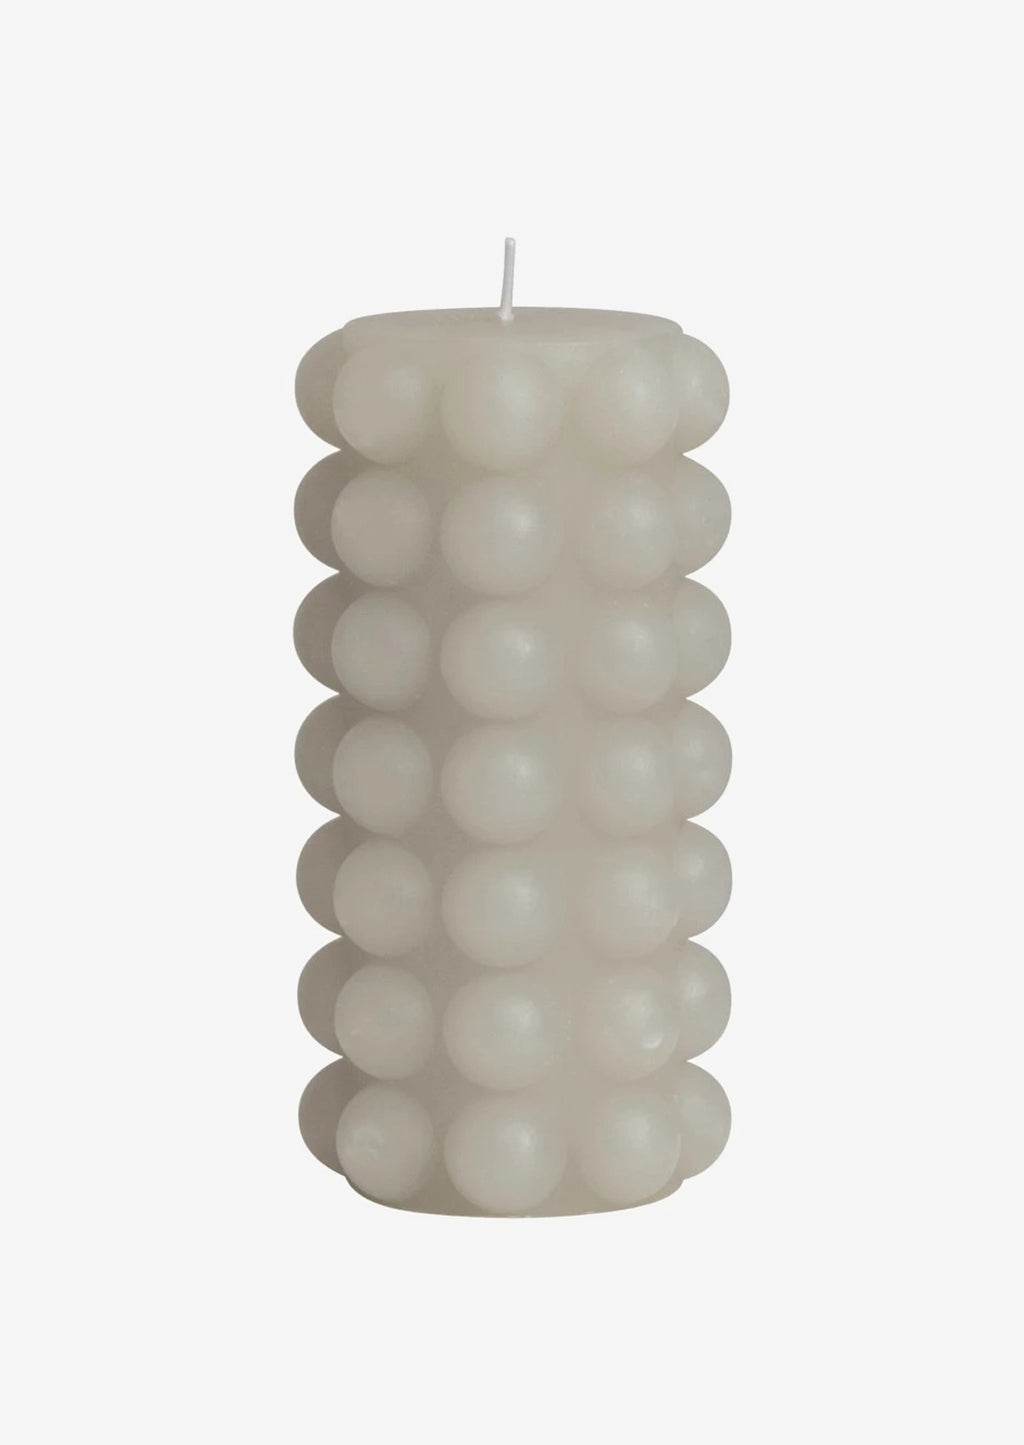 Tall / Oyster: An oyster gray hobnail texture pillar candle in tall.